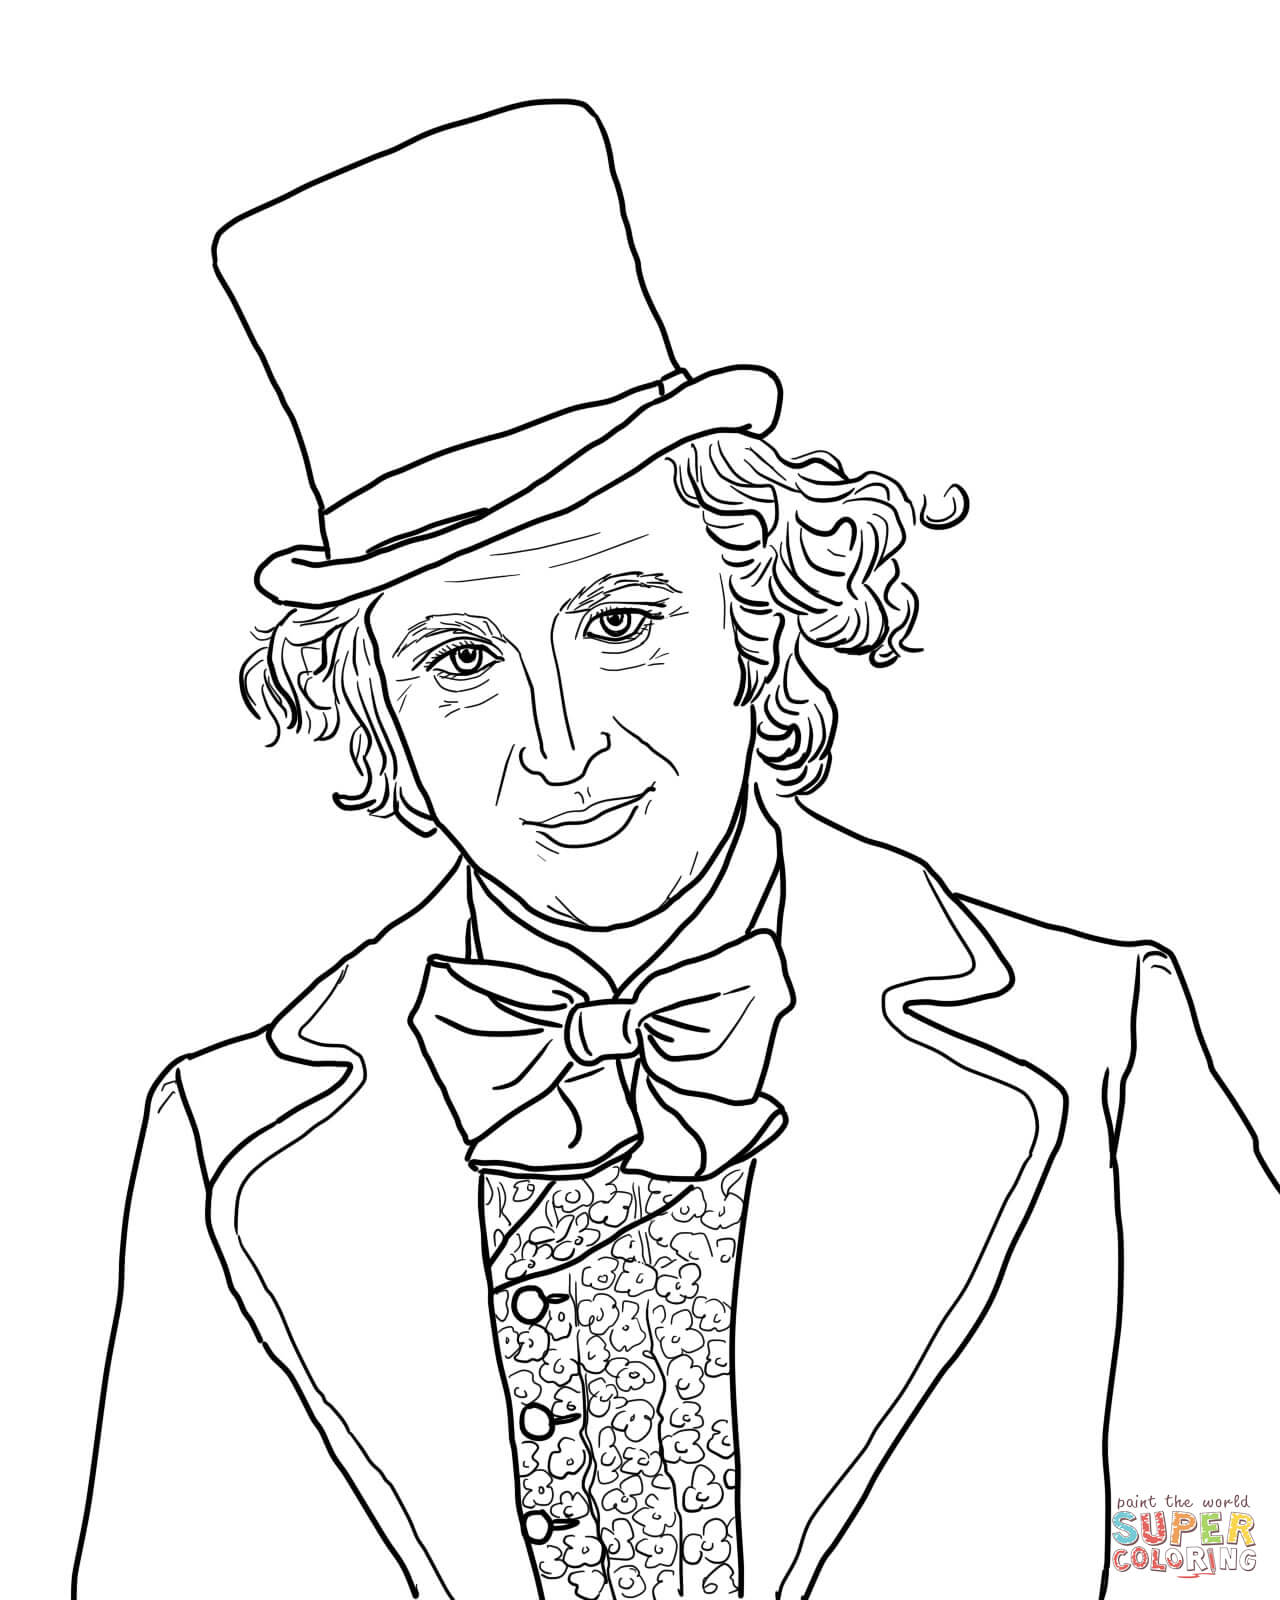 Willy Wonka with Gene Wilder coloring page | Free Printable ...